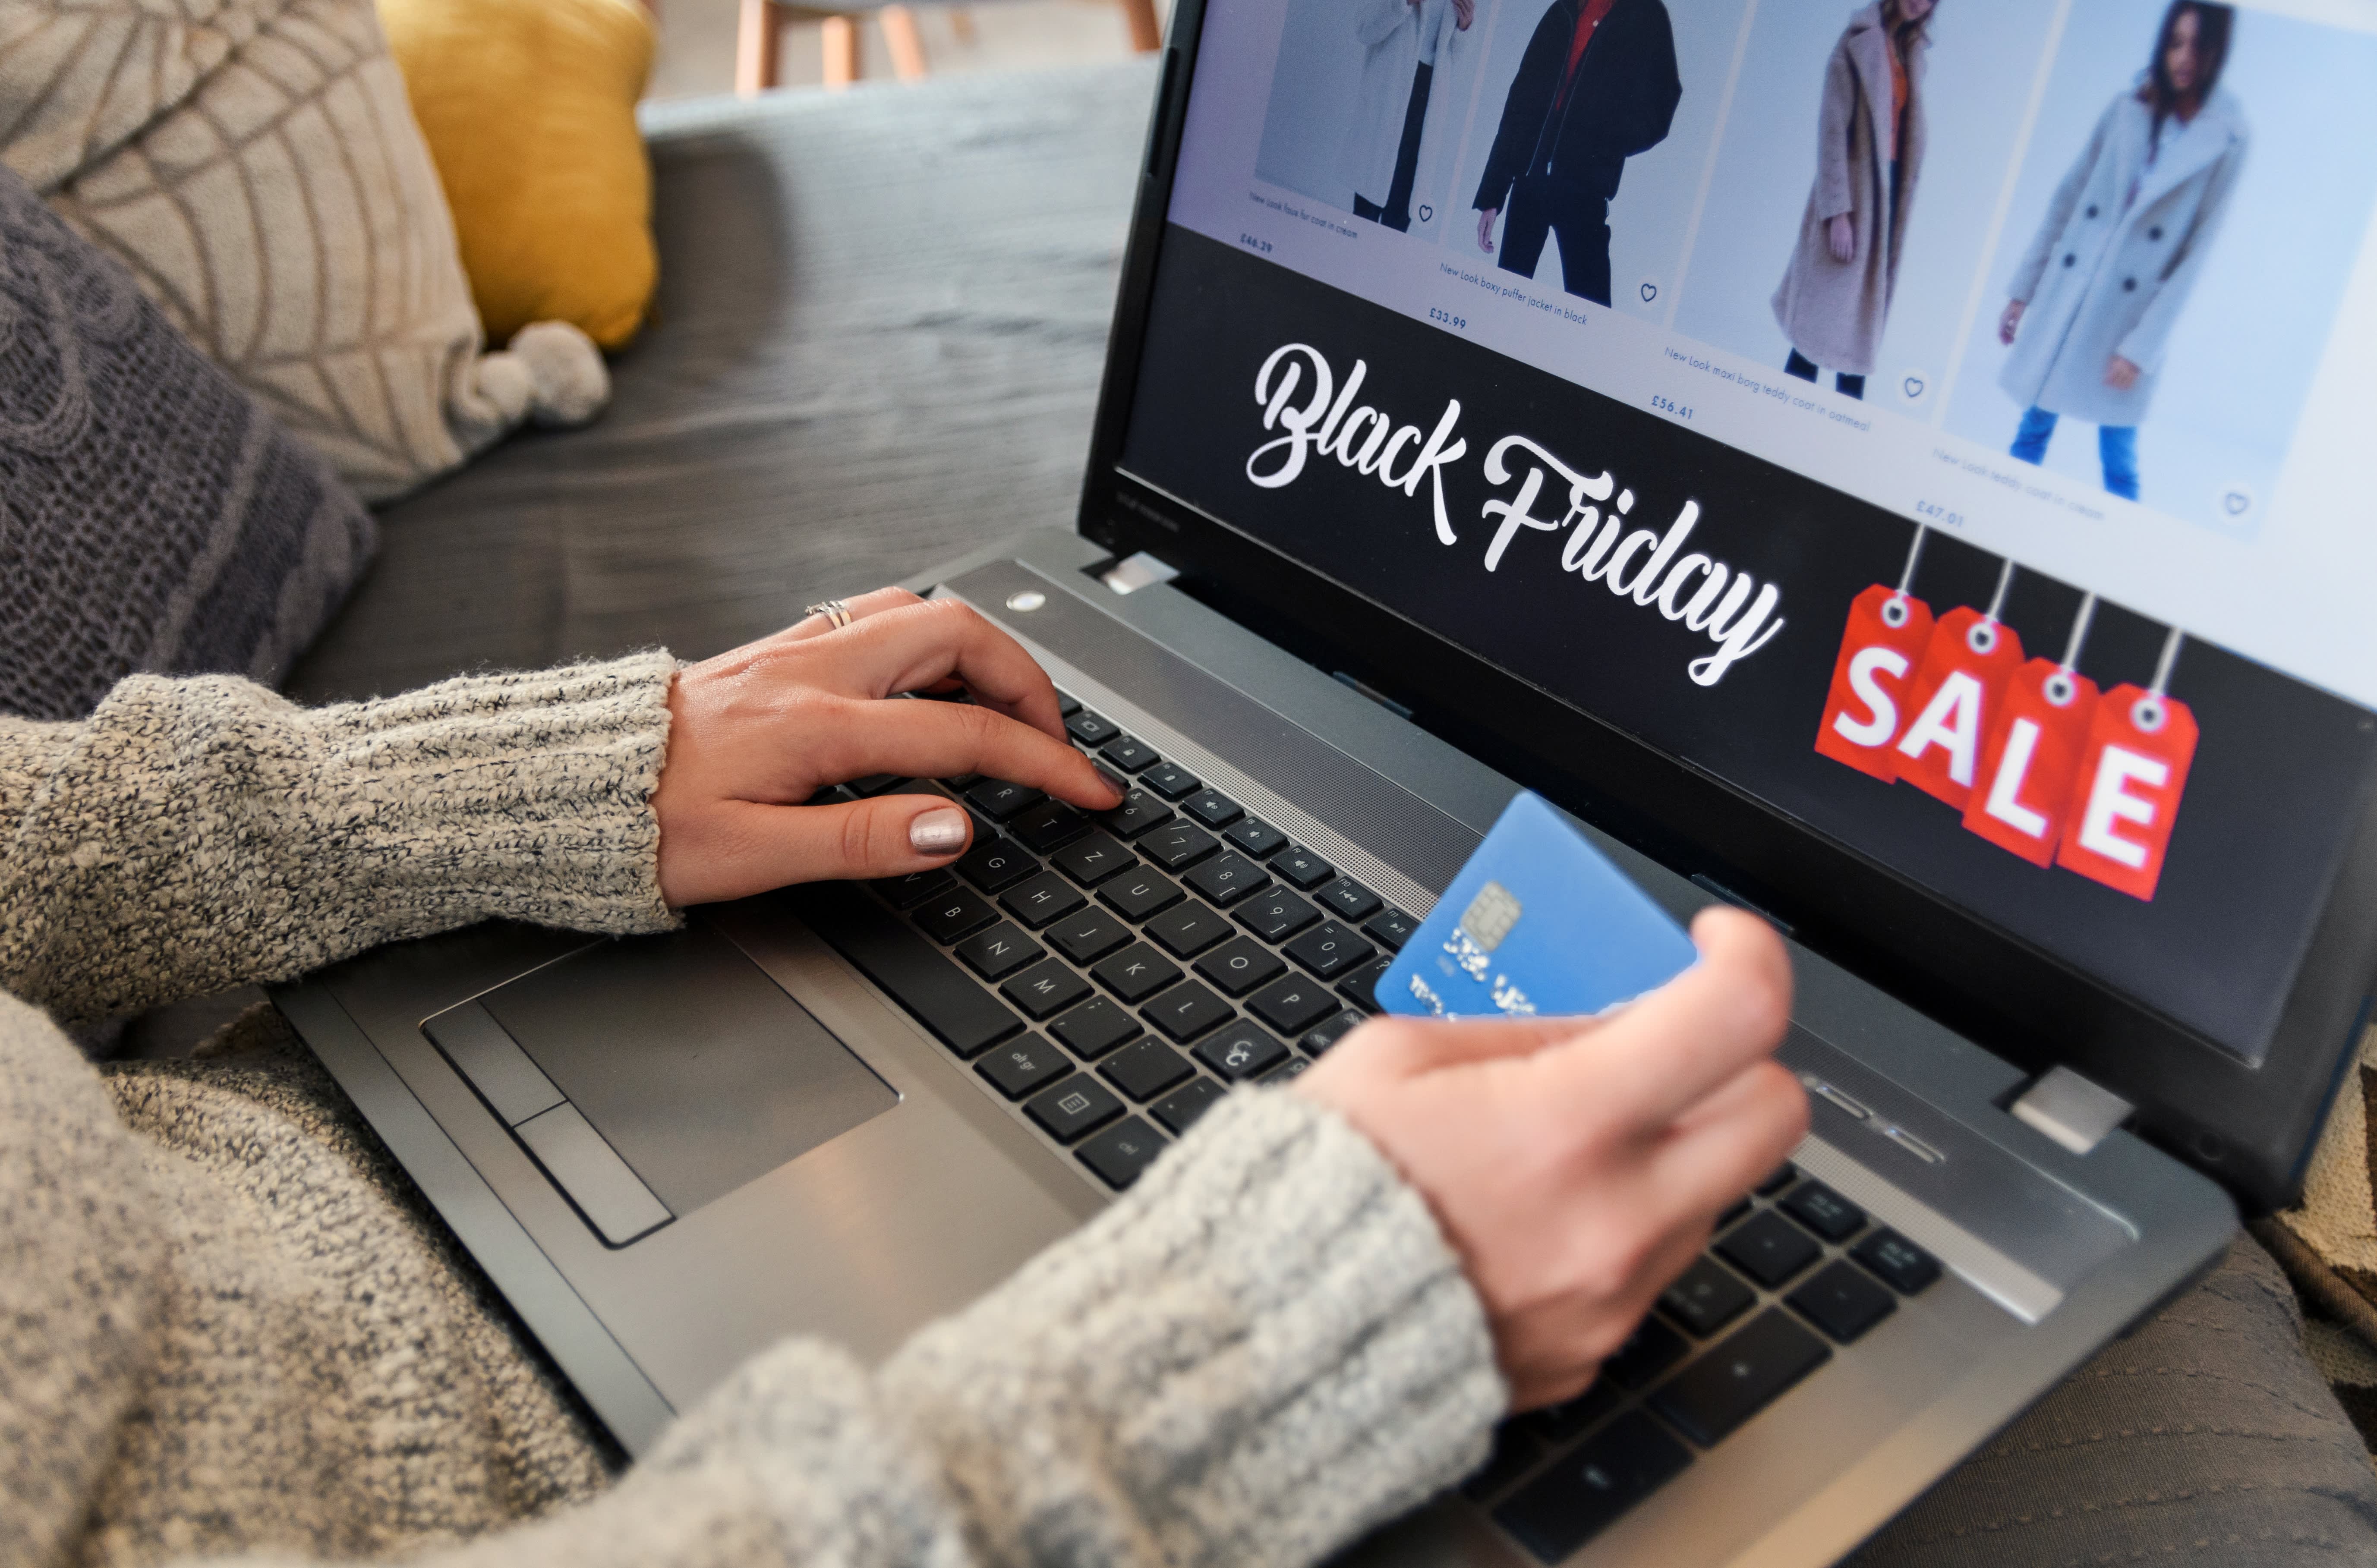 Black Friday 2020 Walmart Other Retailers Reveal Deals Early